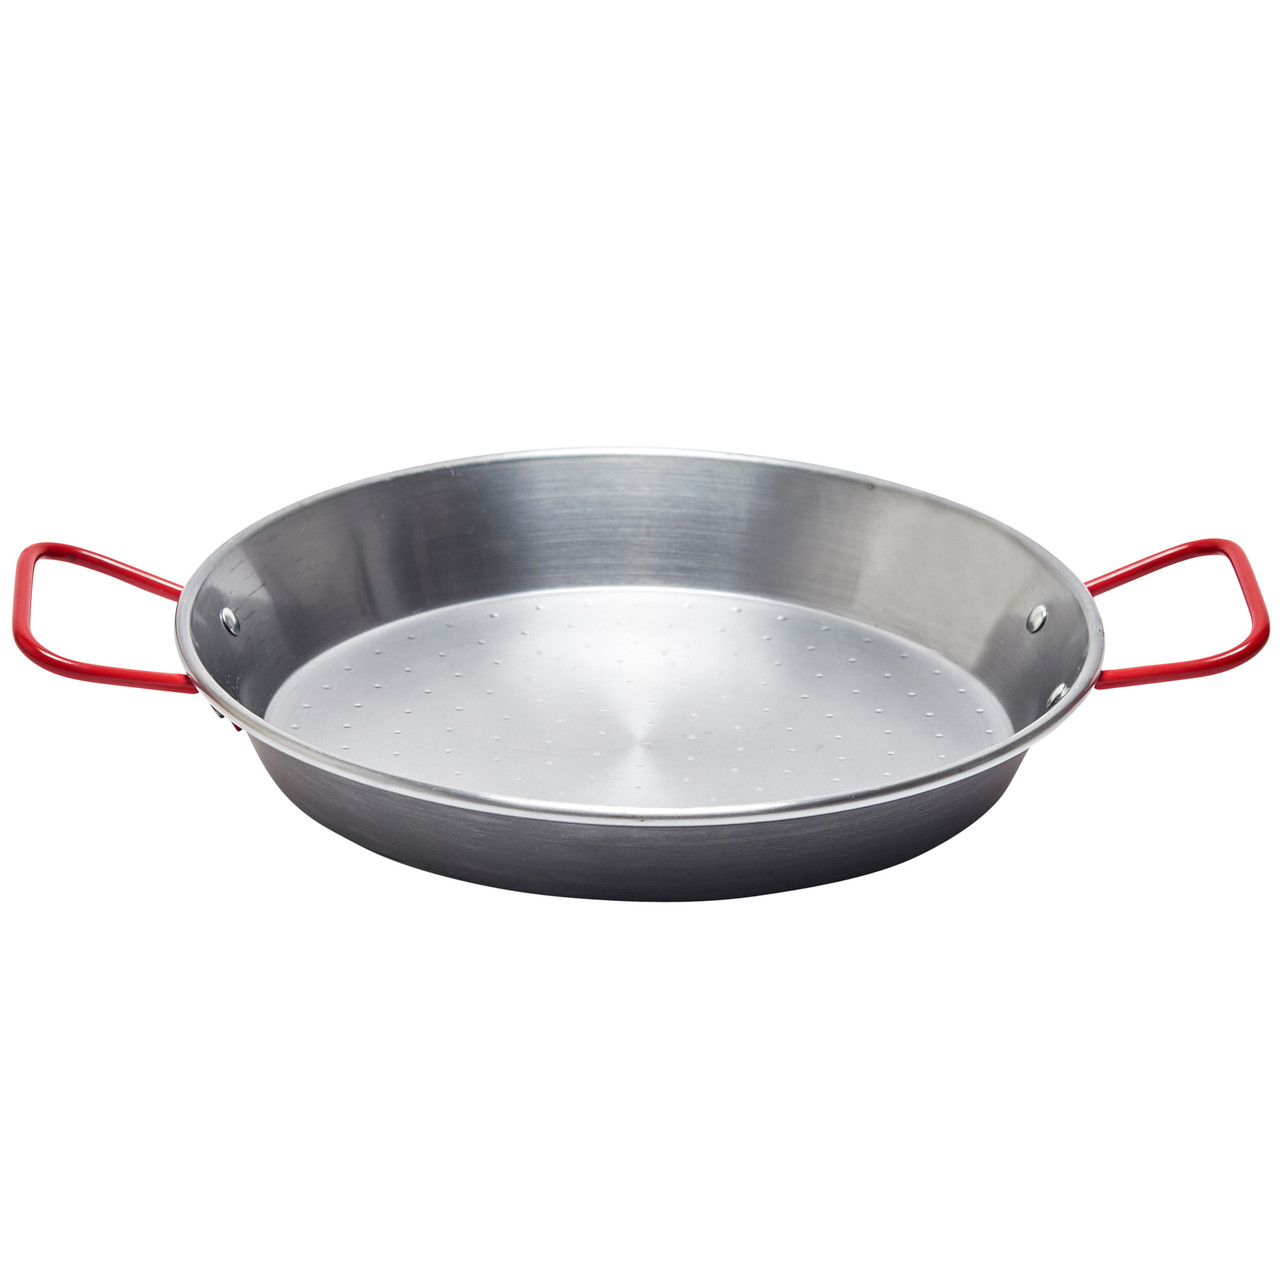 The Paella Company - Paella Pans, Cooking Equipment and high quality  Spanish Food Supplier